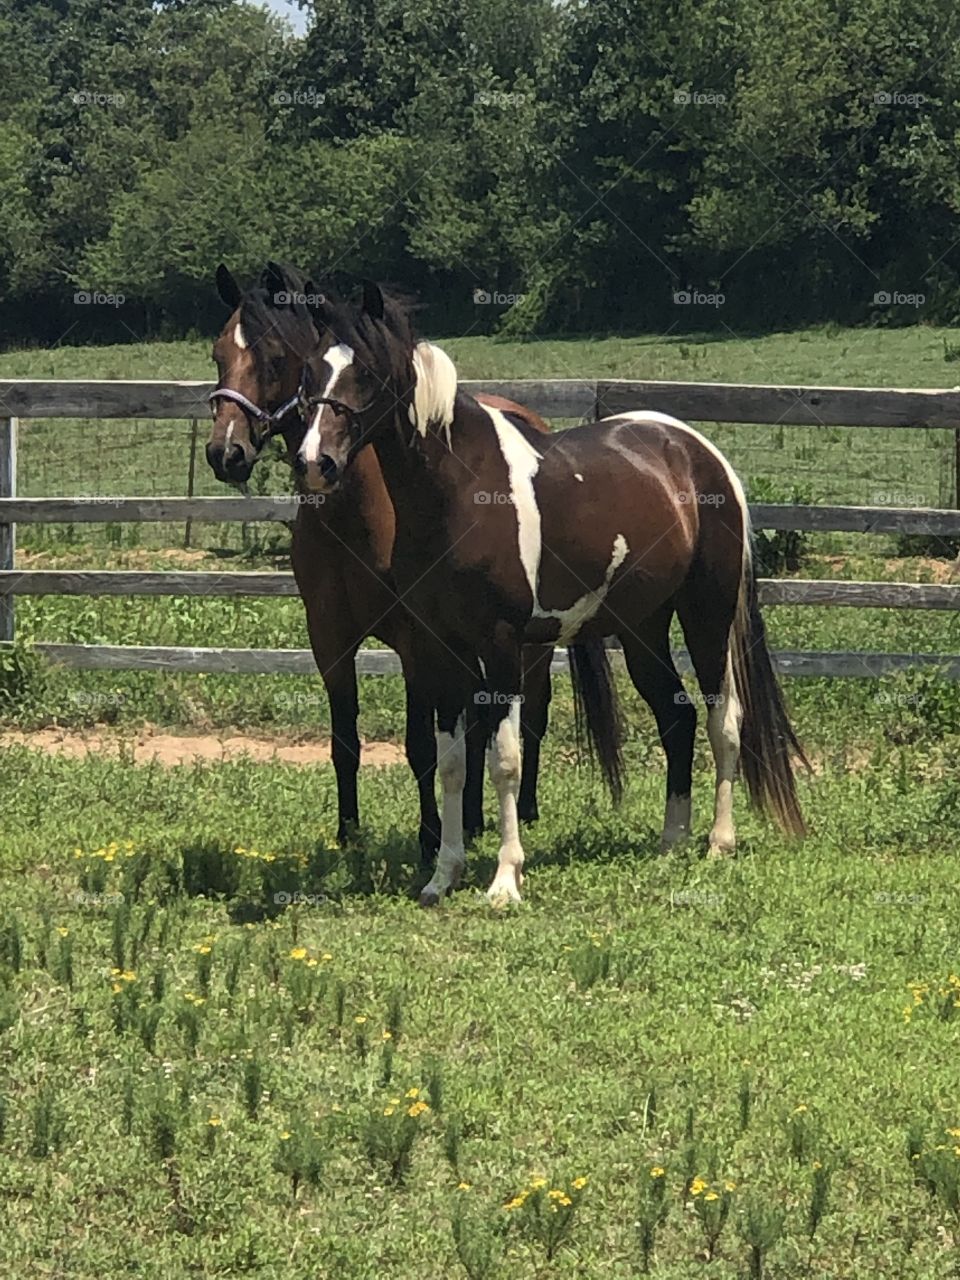 SC local treasure; shown here are Chero & Cochese, 2 Paso Finos. The smaller one is Cochese at 2yrs of age & Chero at 11yrs of age.  Seeing these beautiful animals bond is incredible and I’m glad I got to see them together. Sweet Southern style 🐎